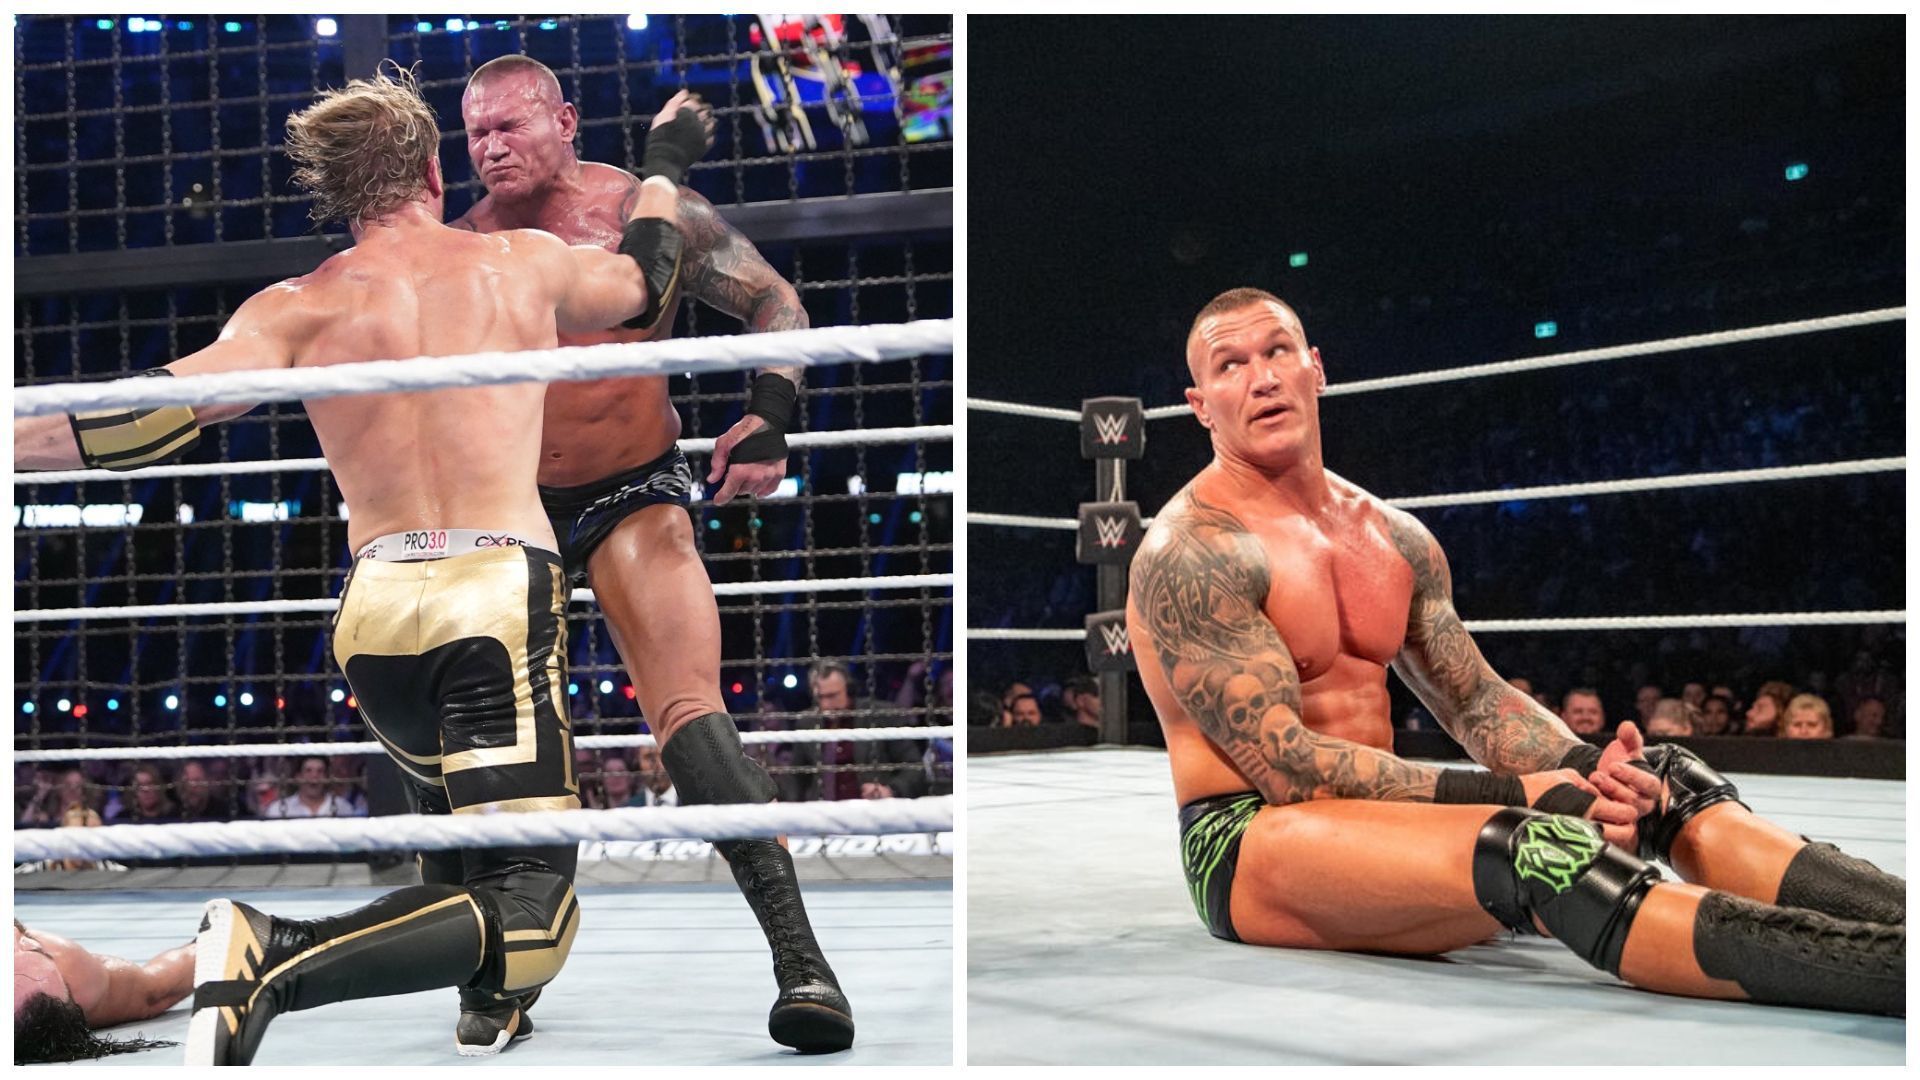 Logan Paul and Randy Orton competed inside the WWE Men